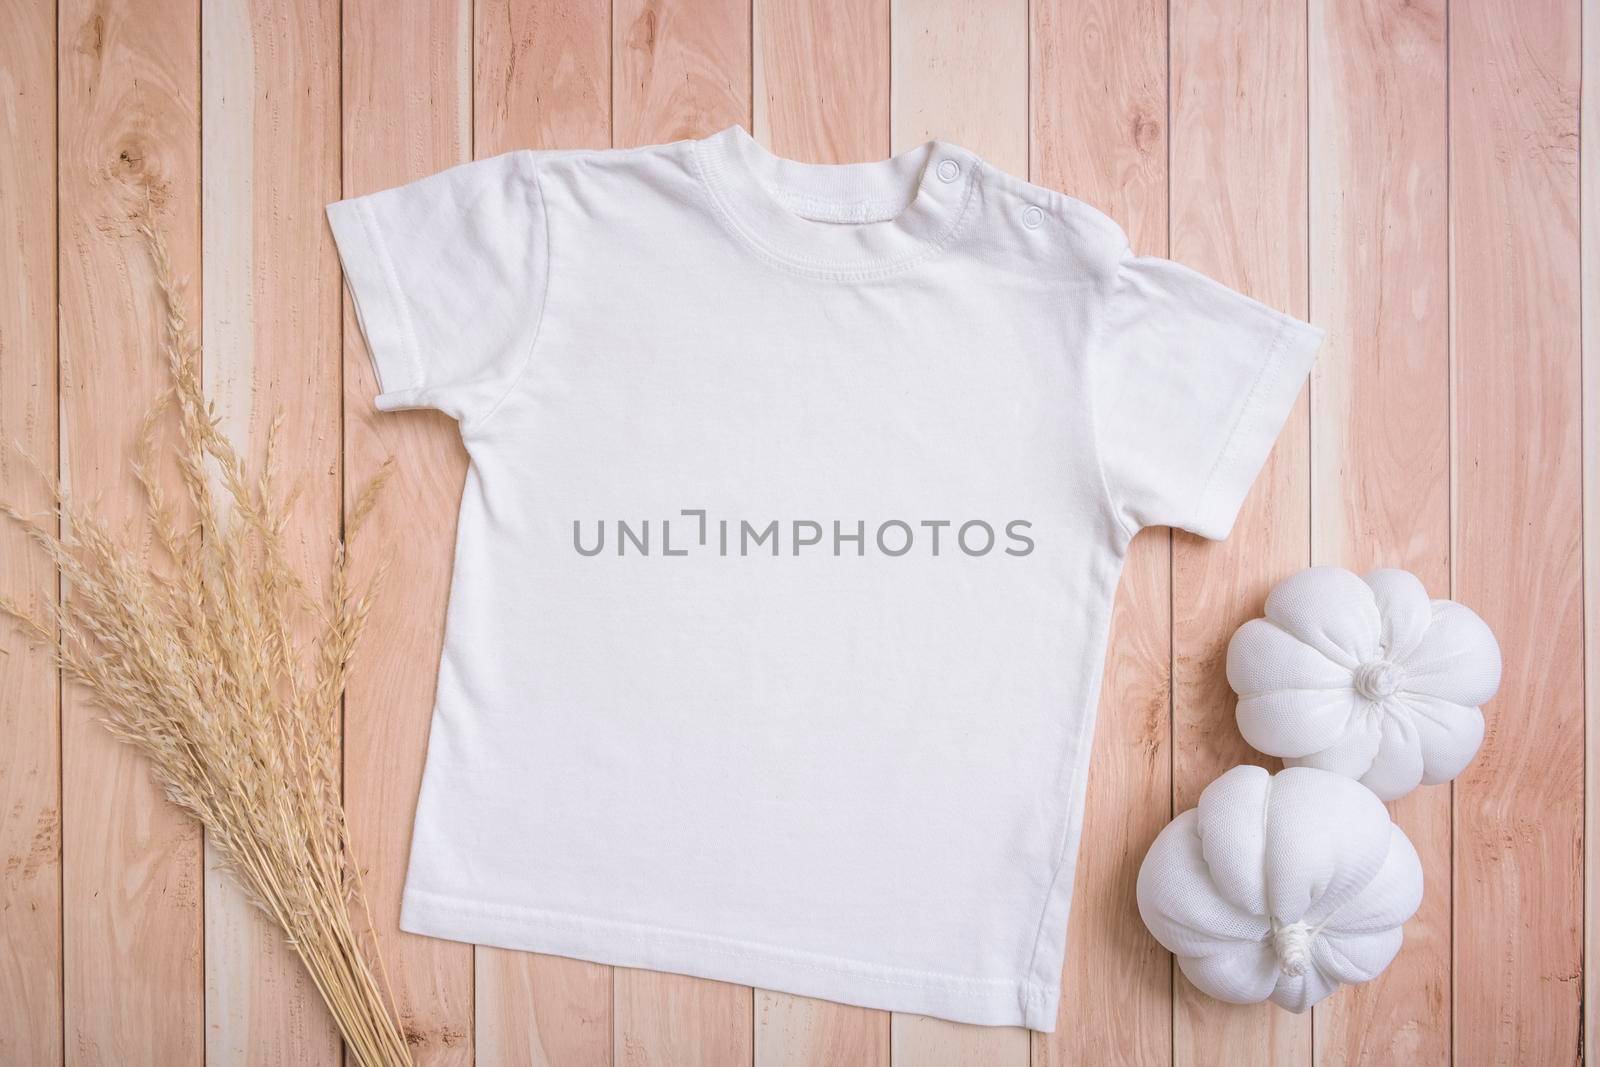 White baby t-shirt top view. Mock-up for logo, text or design on wooden background. Flat lay child clothes with pumpkins by ssvimaliss